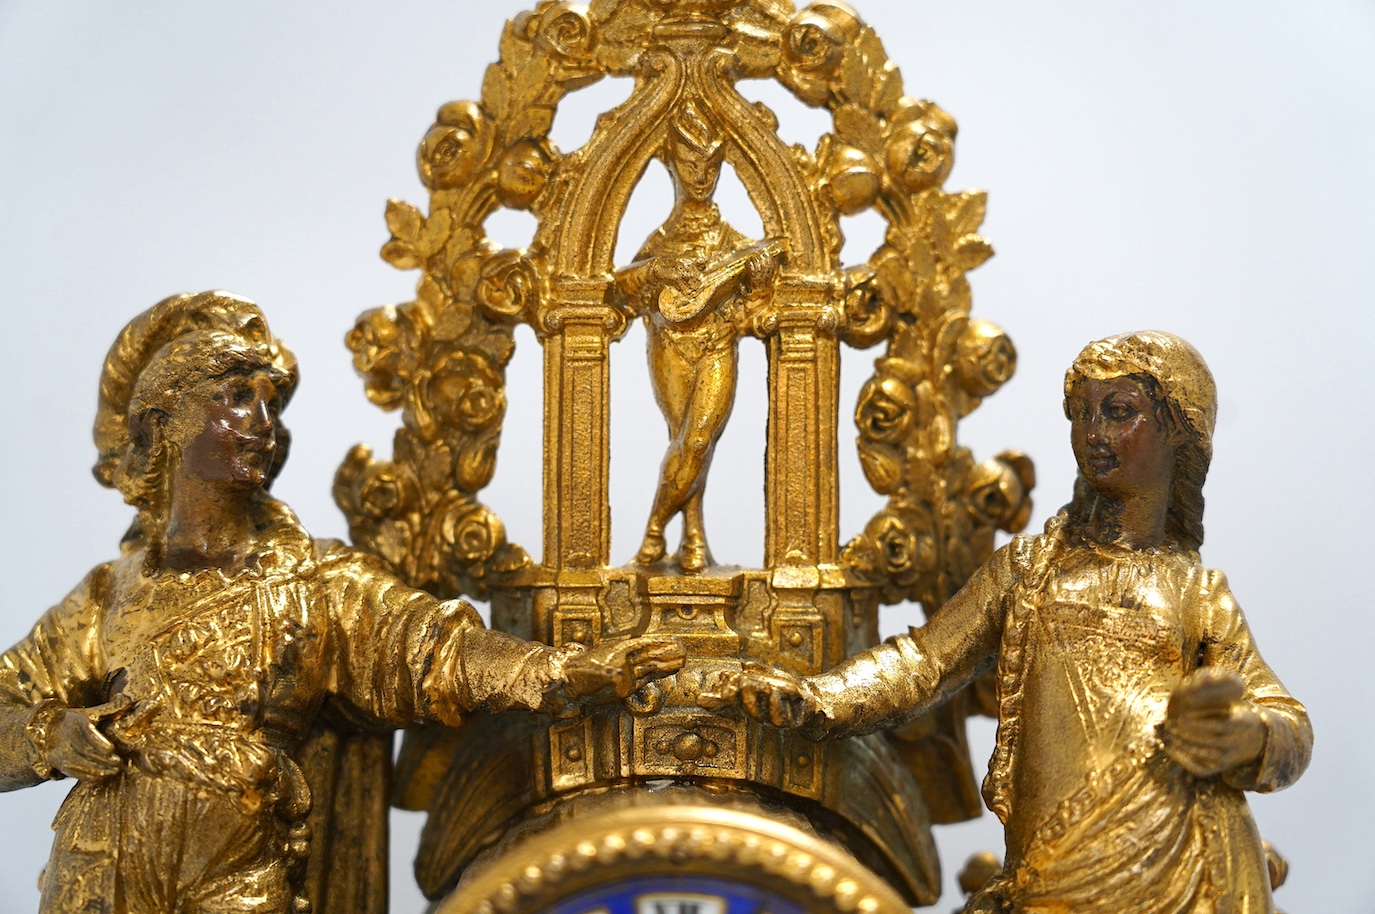 A large gilt metal figural mantel clock with floral porcelain dial and panels, under a glass dome, 52cm high (including stand). Condition - fair, not tested as working